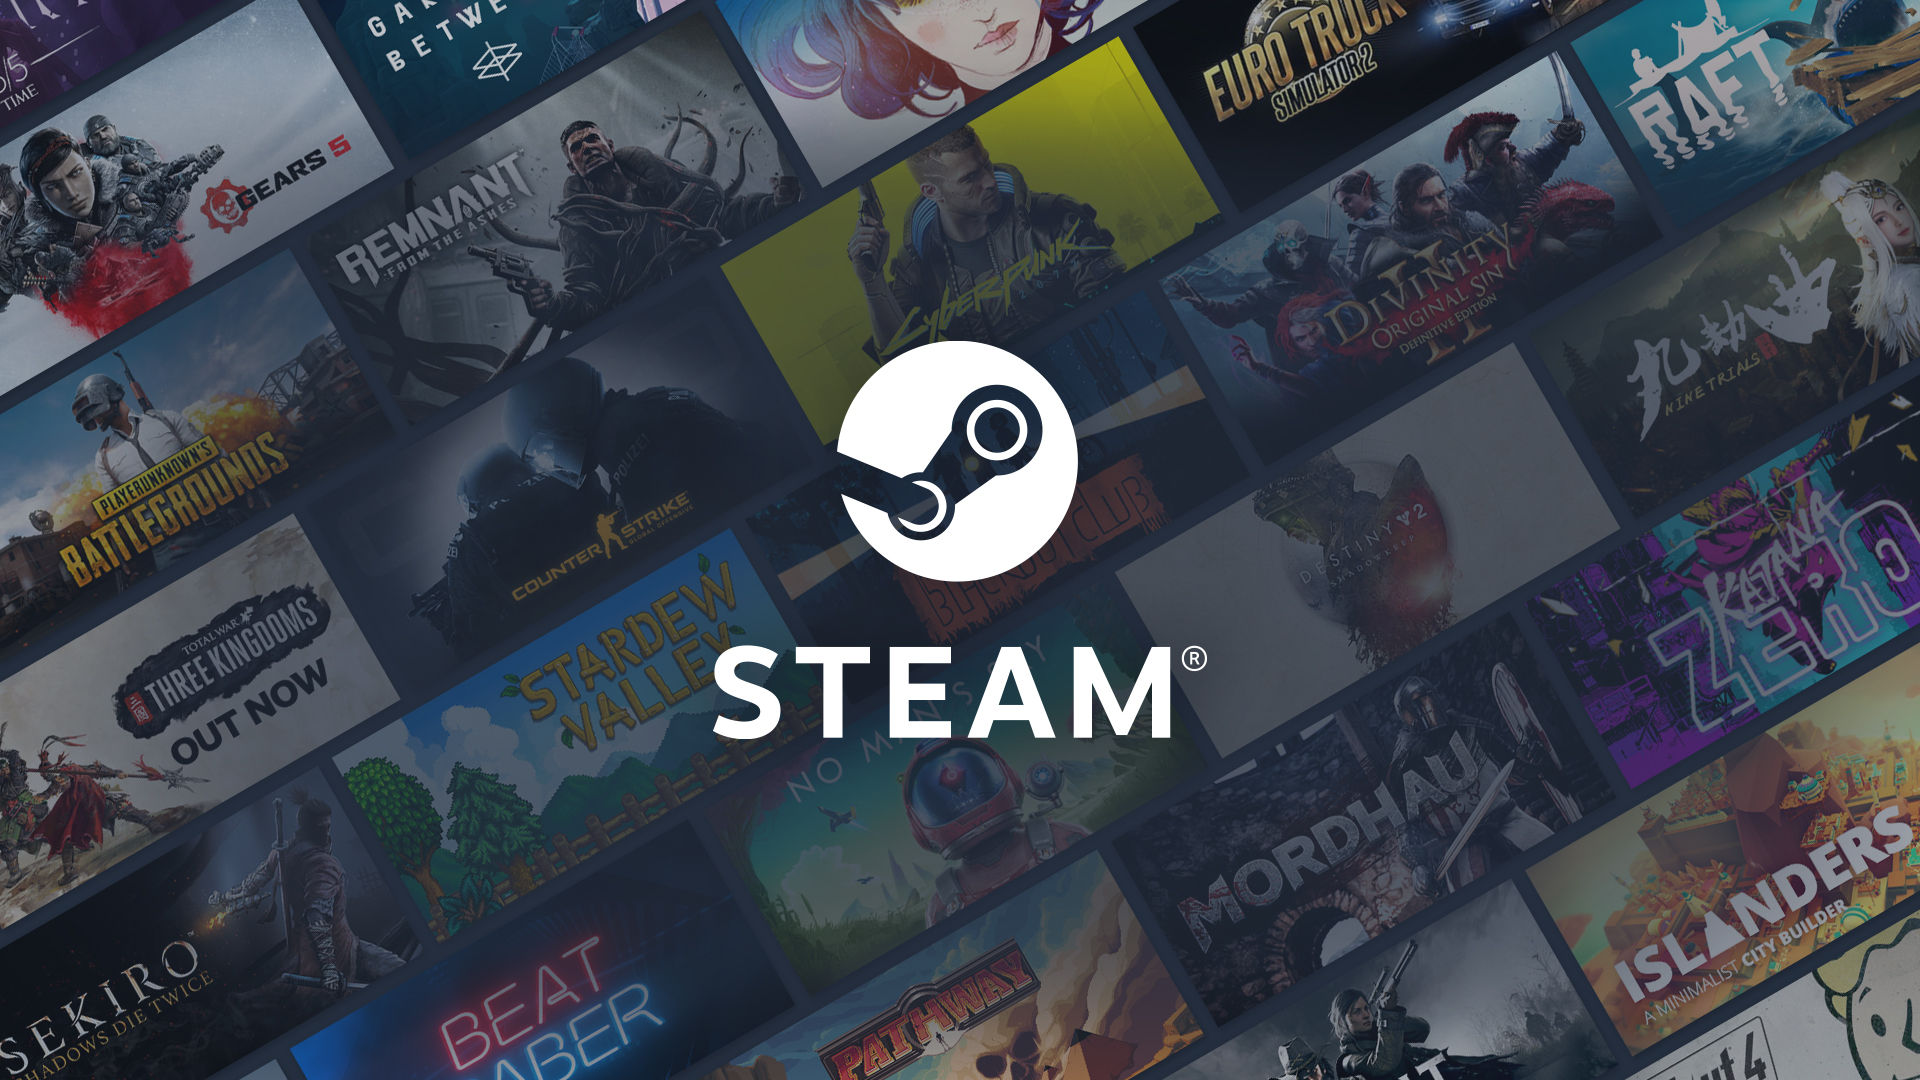 Steam has improved the interaction with demos: now you don't have to install them right away, and the demo can get a separate page